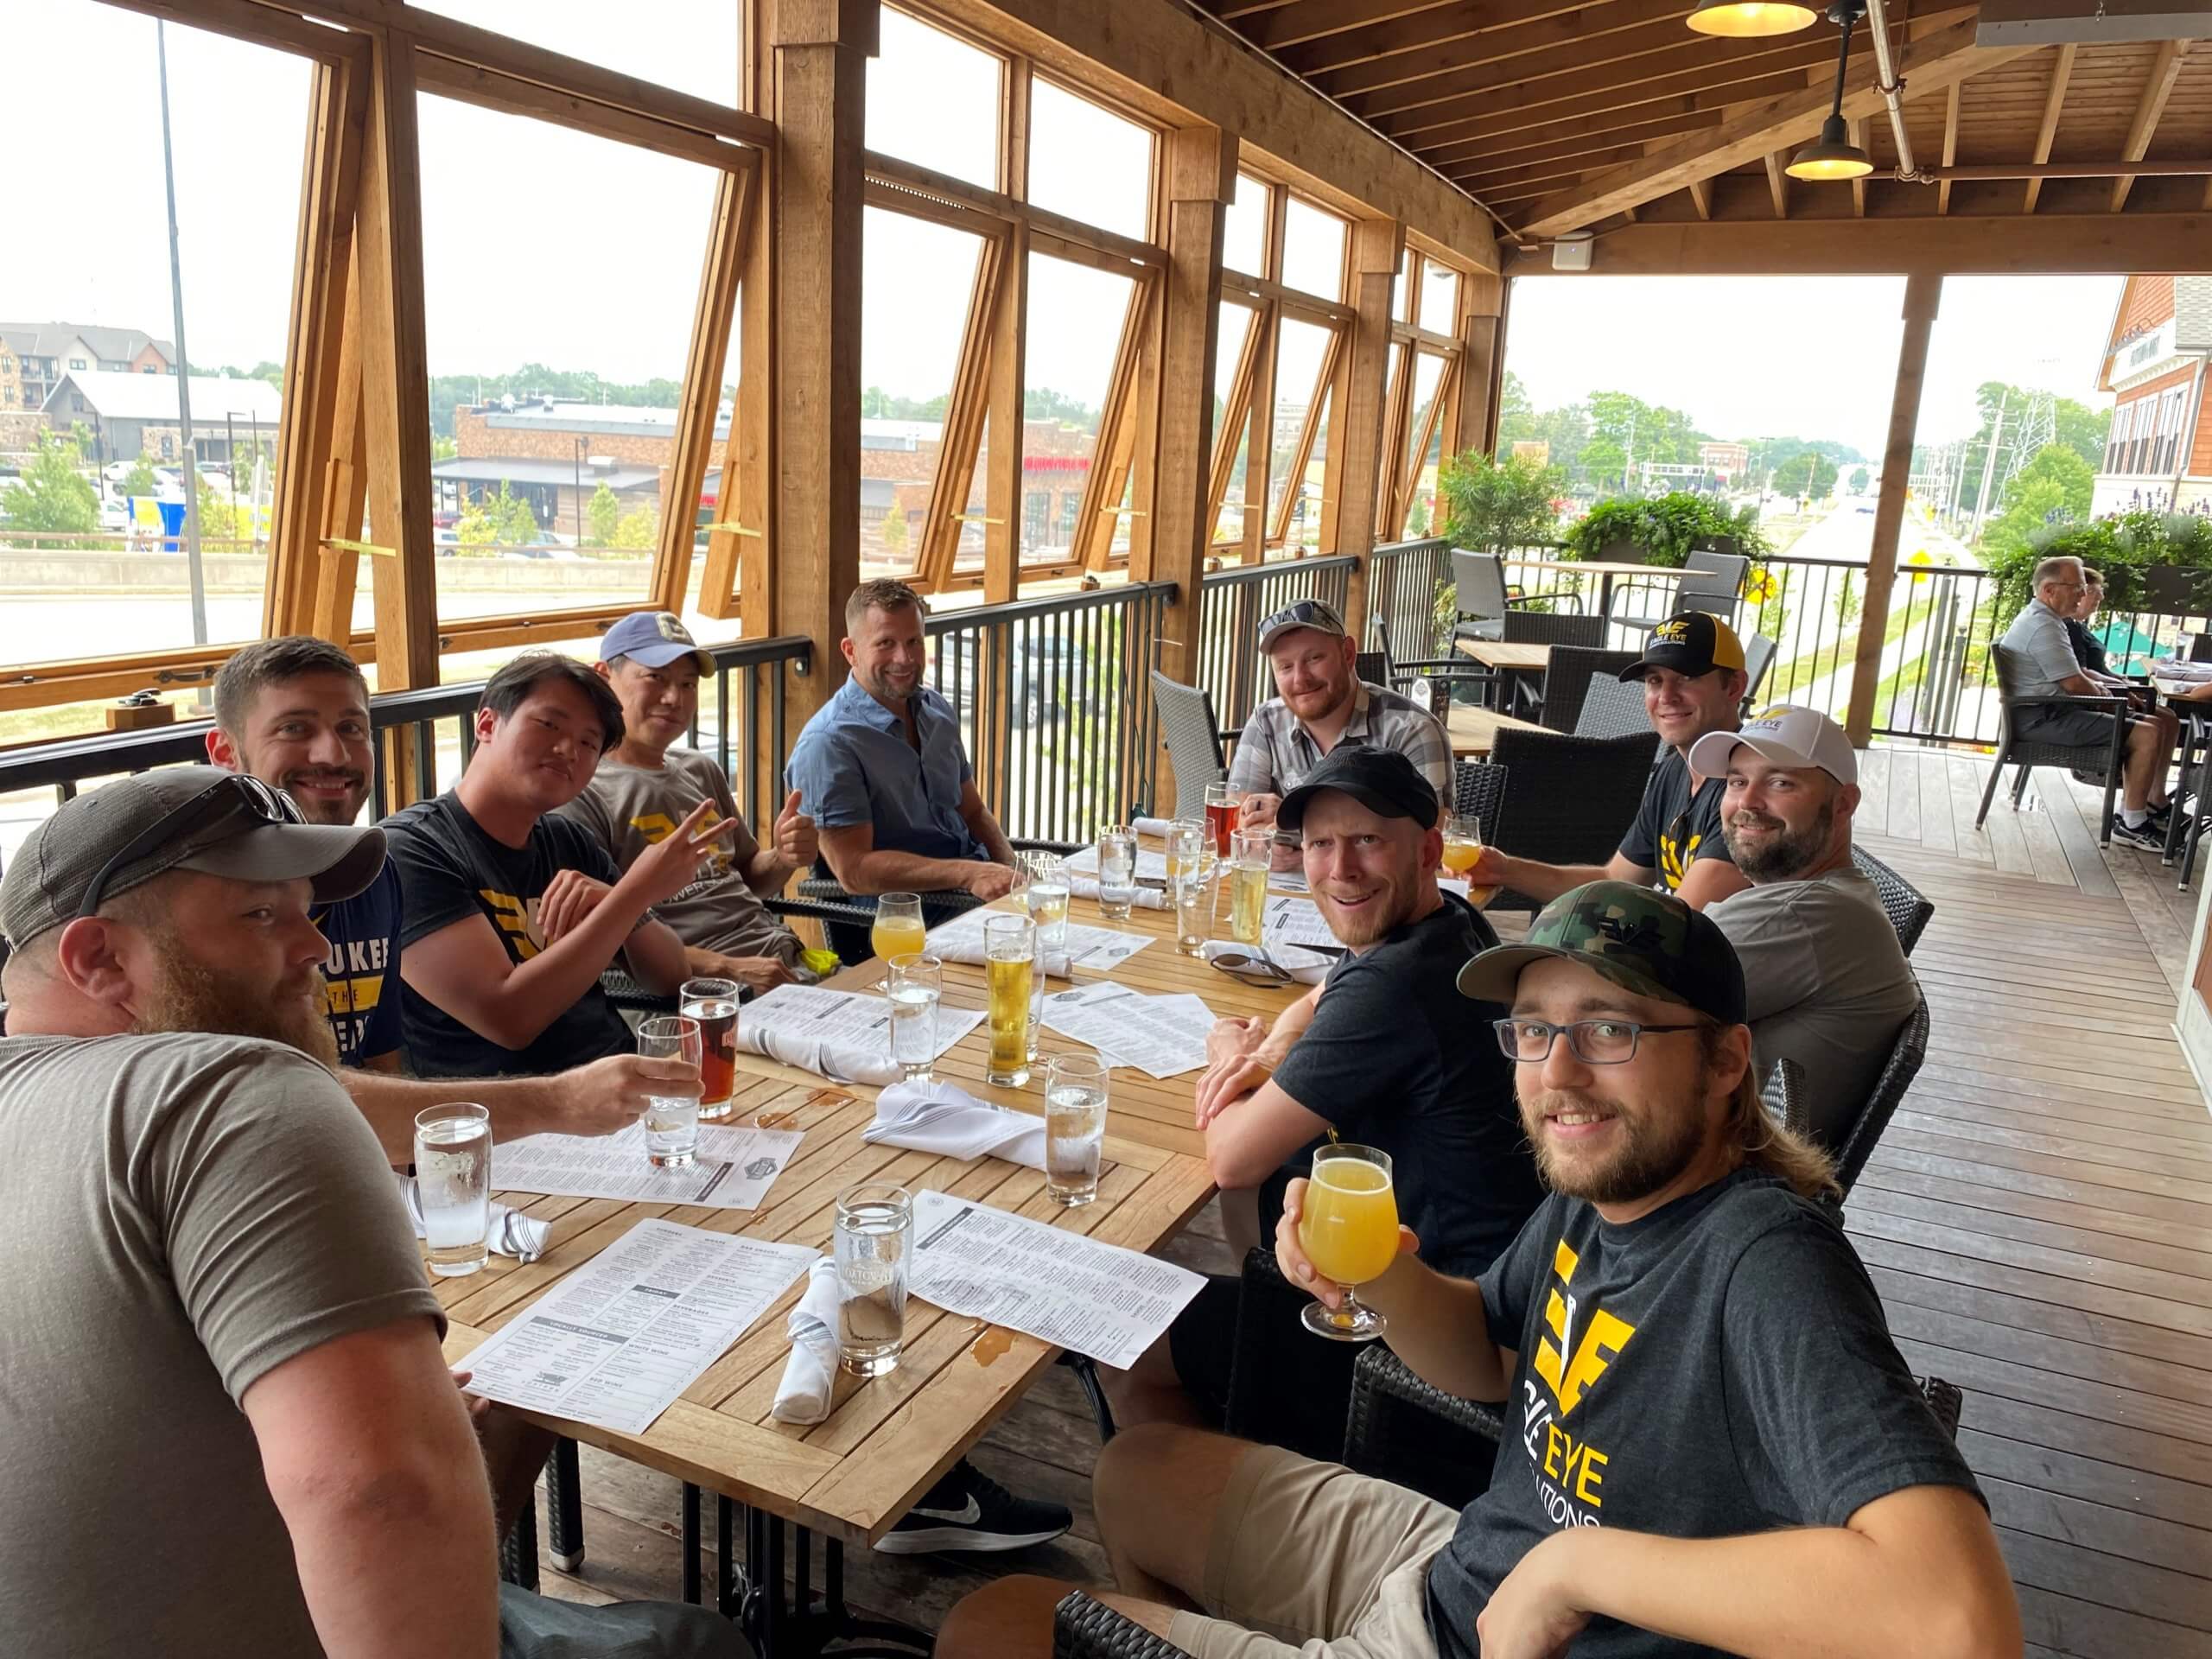 Eagle Eye Power Solutions team members celebrating Summer with food and beverages.